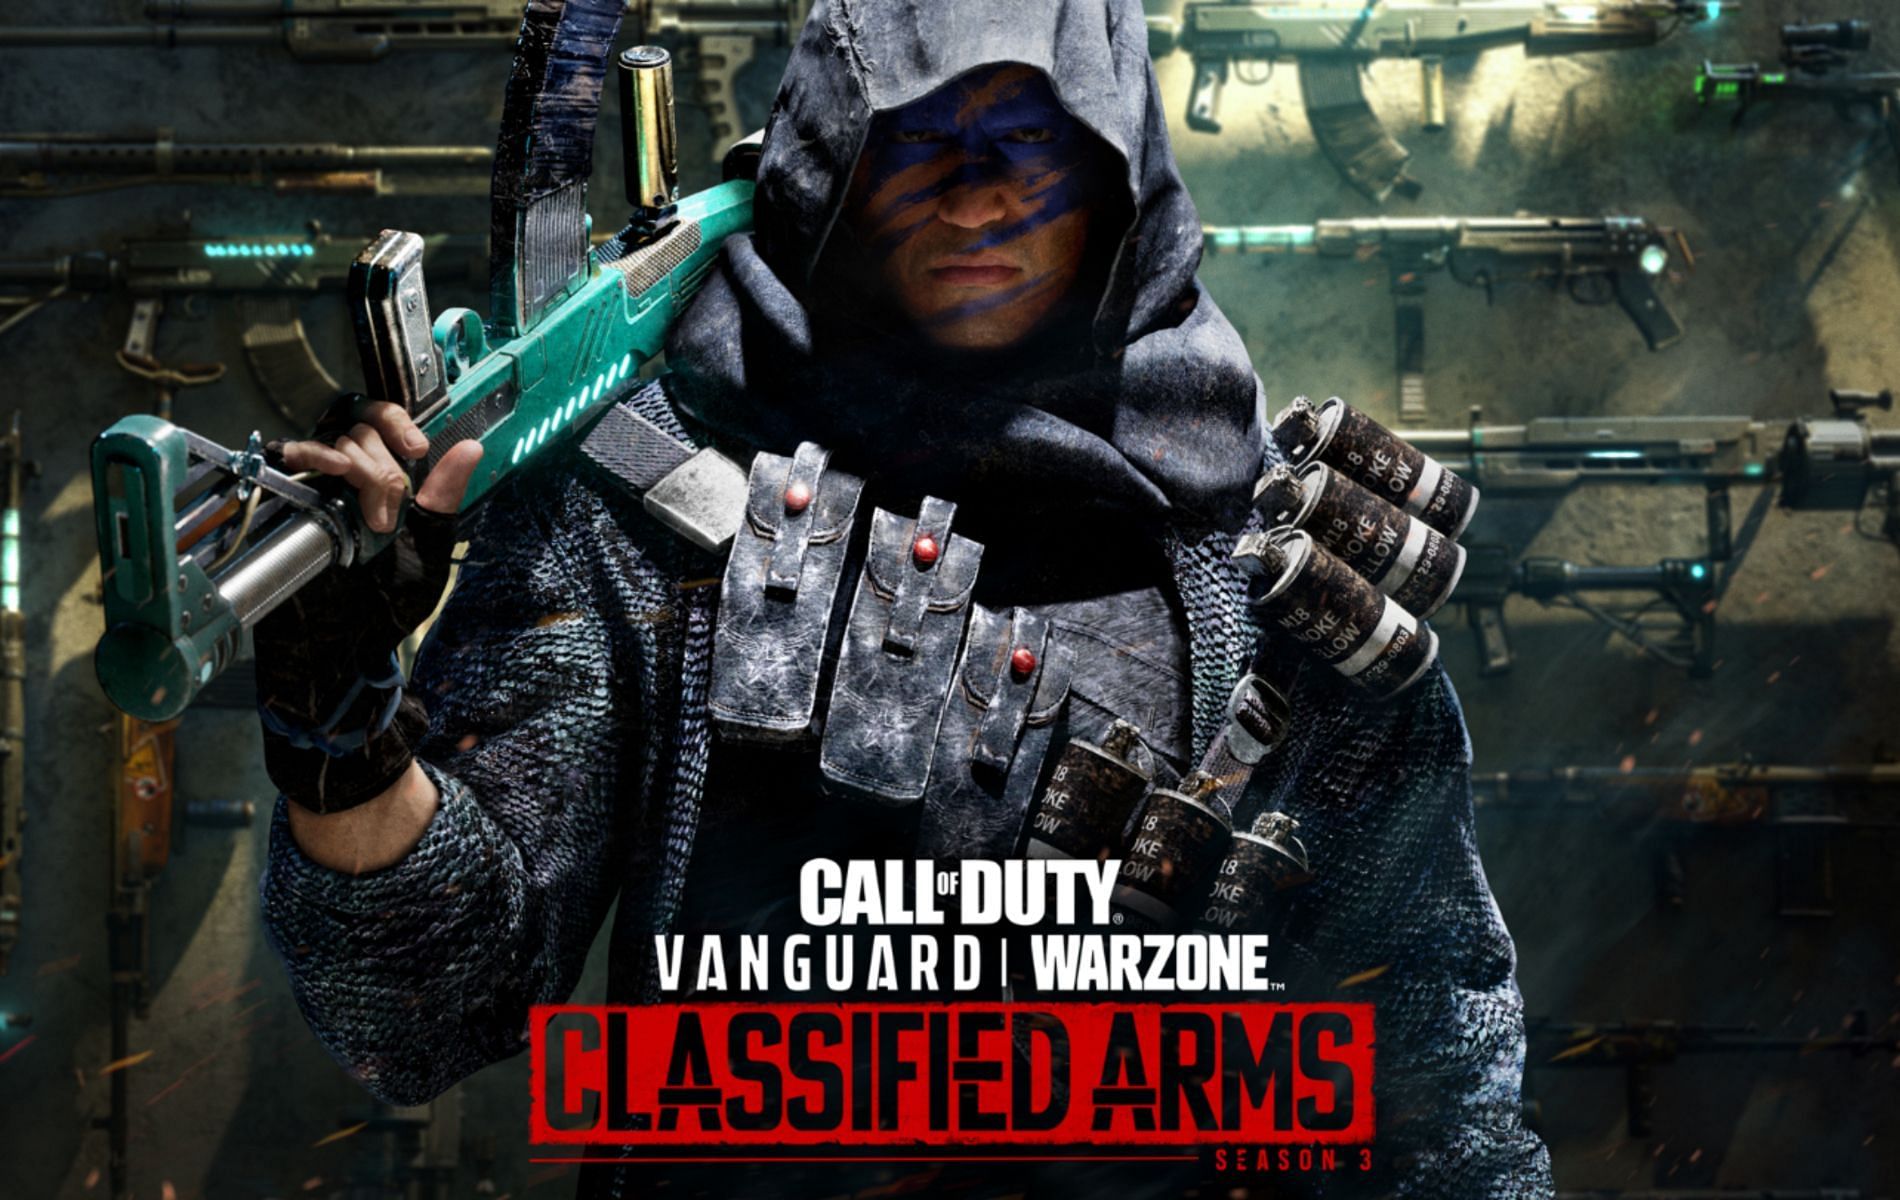 Call of Duty Classified Arms (Image via Call of Duty)